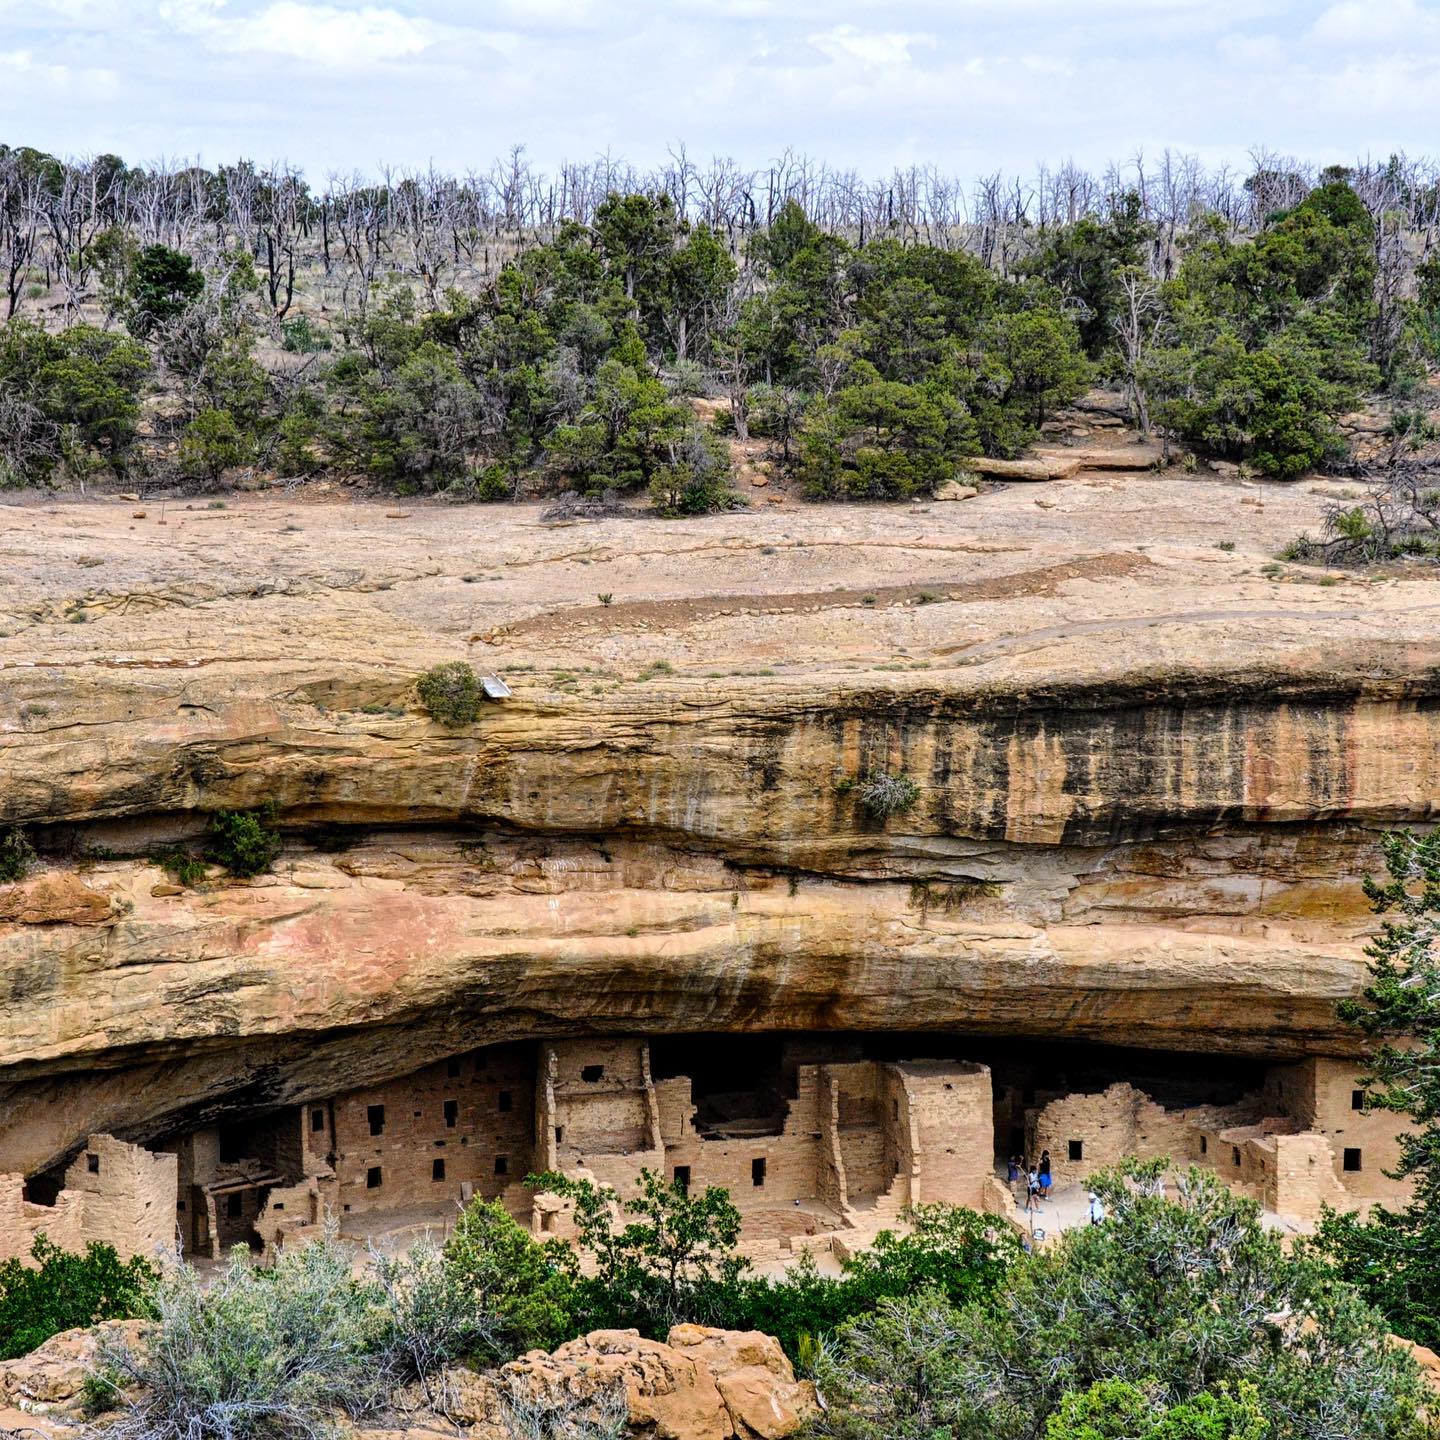 Mesa Verde NP, Colorado 

While other national parks in the USA are mainly famous for their breathtaking landscapes, Mesa Verde National Park is famous for its archaeological sites and historical places - the rock dwellings of the ancient Anasazi people.
The rock dwellings were discovered in the late 1880s when two cowboys were searching for stray cattle. The exposure by a Swedish explorer led in 1906 to the establishment of the third national park in the USA. 
The most famous stone dwellings are the well preserved Spruce Tree House, the Balcony House, the Cliff Palace, the Long House, and the Step House.
This pic shows Spruce Tree House, which can be visit without a guided tour. 
Have you already visited Mesa Verde NP?

#usatravel #usatravels #usatrip #america #usanationalparks #mesaverde #mesaverdenationalpark #historicalbuilding #historicalplace #dwellings #onlyincolorado #visitcolorado #explorecolorado #exploremore #exploretheusa #anasazi #archaelogicalsite #colorfulcolorado #cortezcolorado #usalove #travelphotography #travel_captures #coloradogram #travelcouple #travelgrams #travelmore #travelmoments #travellife #travelinspiration #tellus